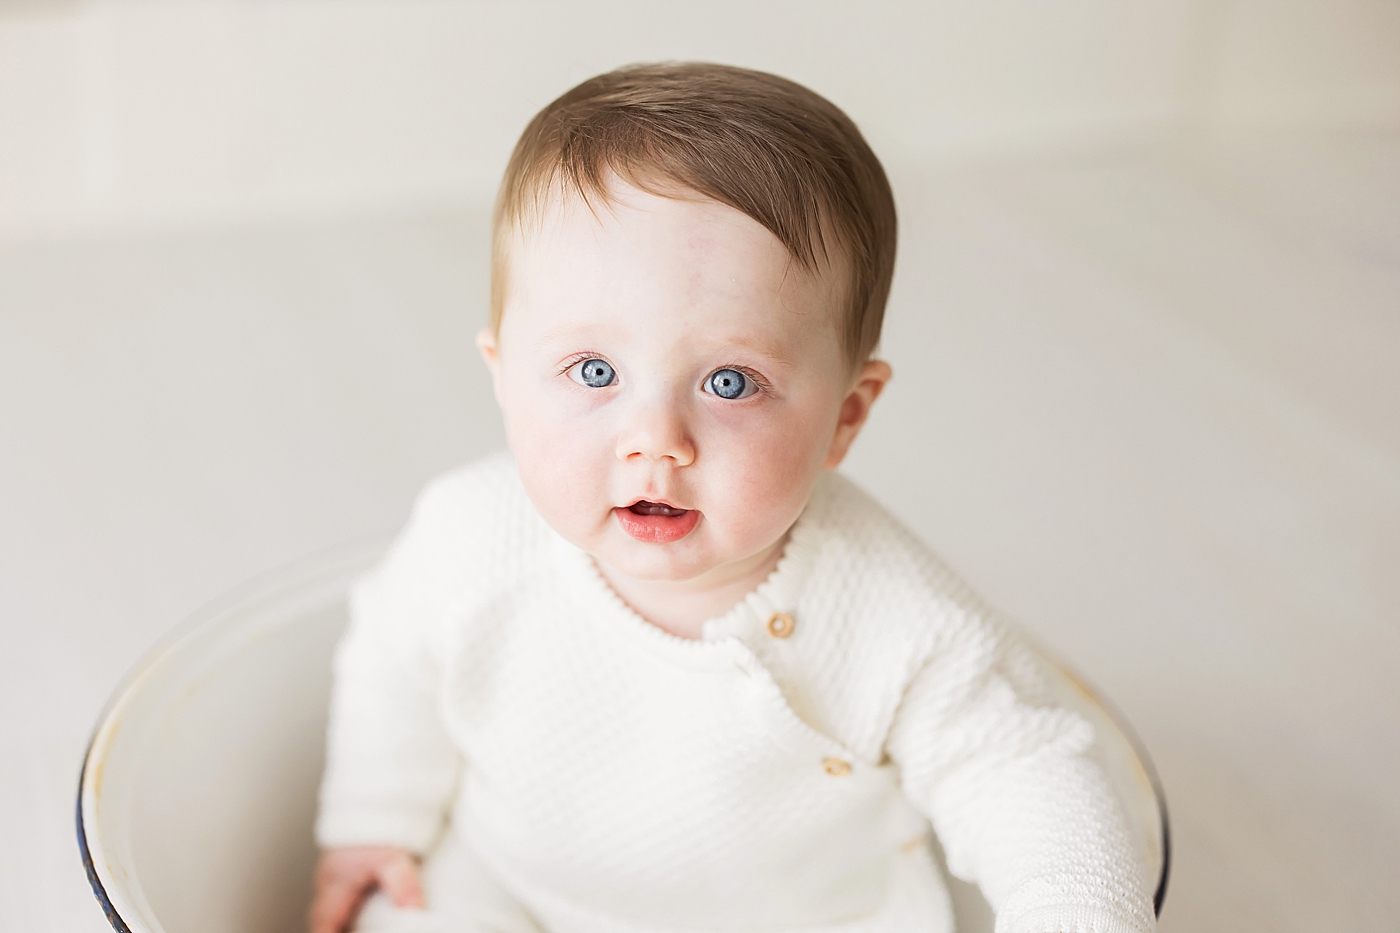 Baby boy with big blue eyes. Photo by Fresh Light Photography